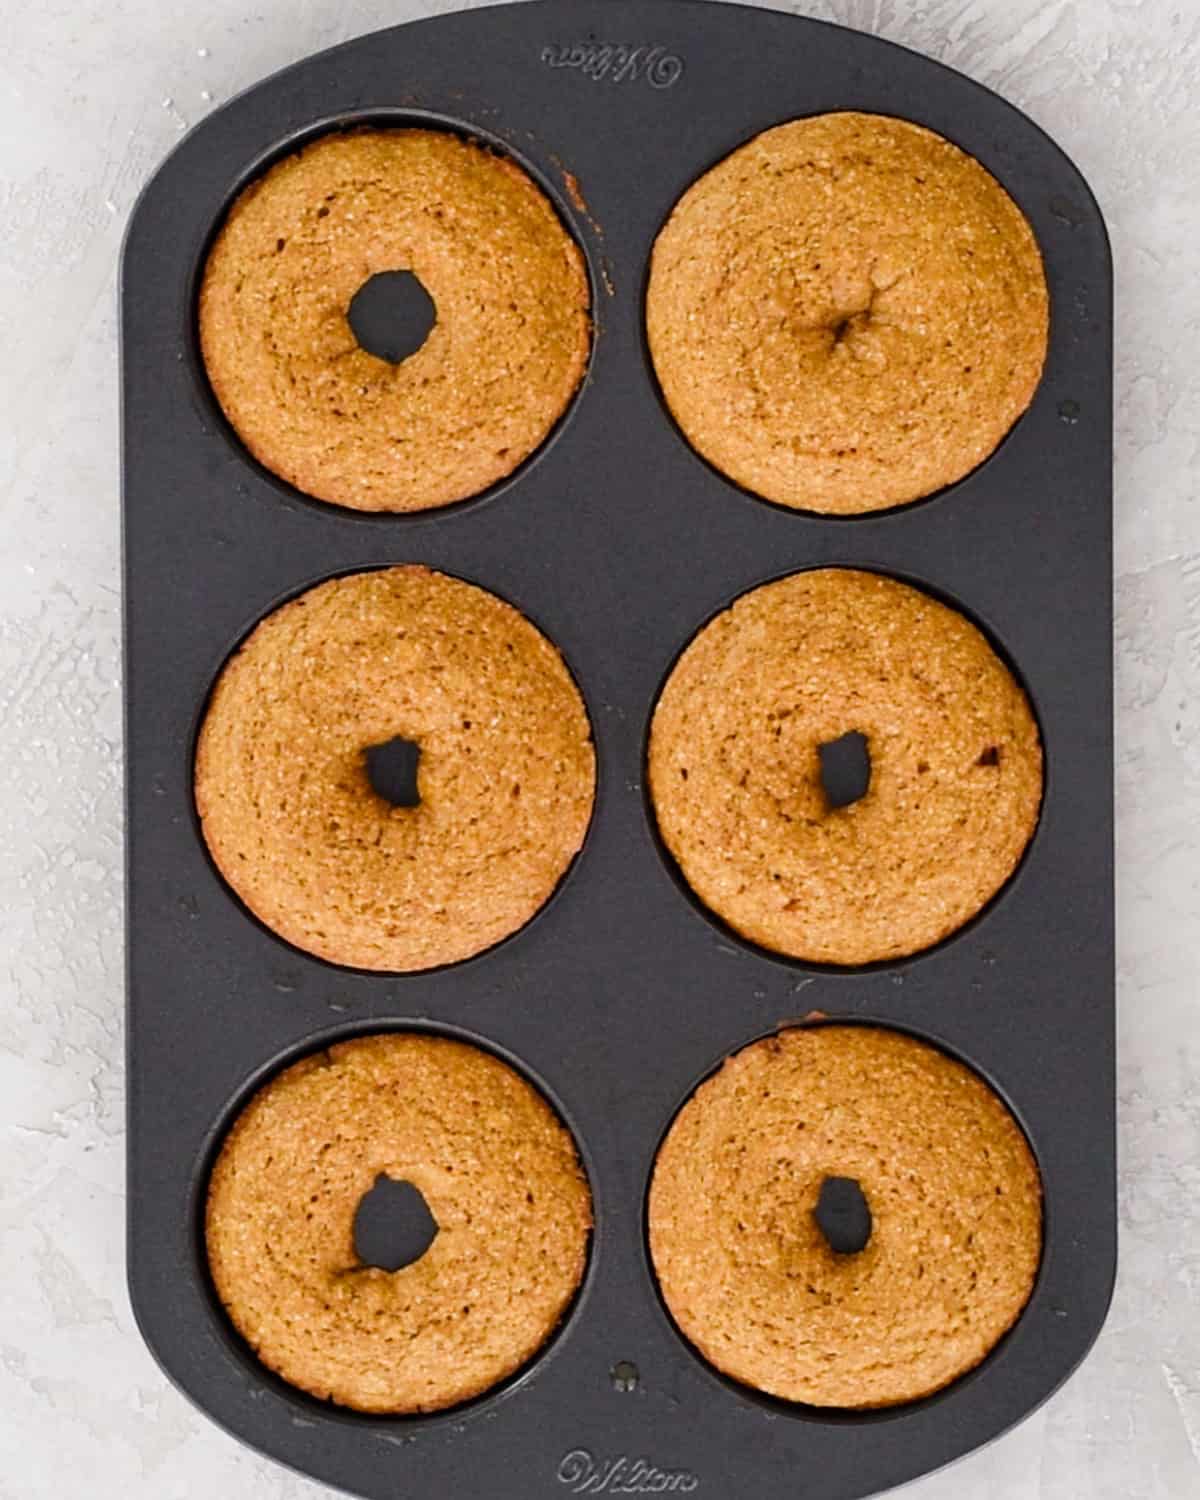 Baked Pumpkin Donuts in a donut pan after baking